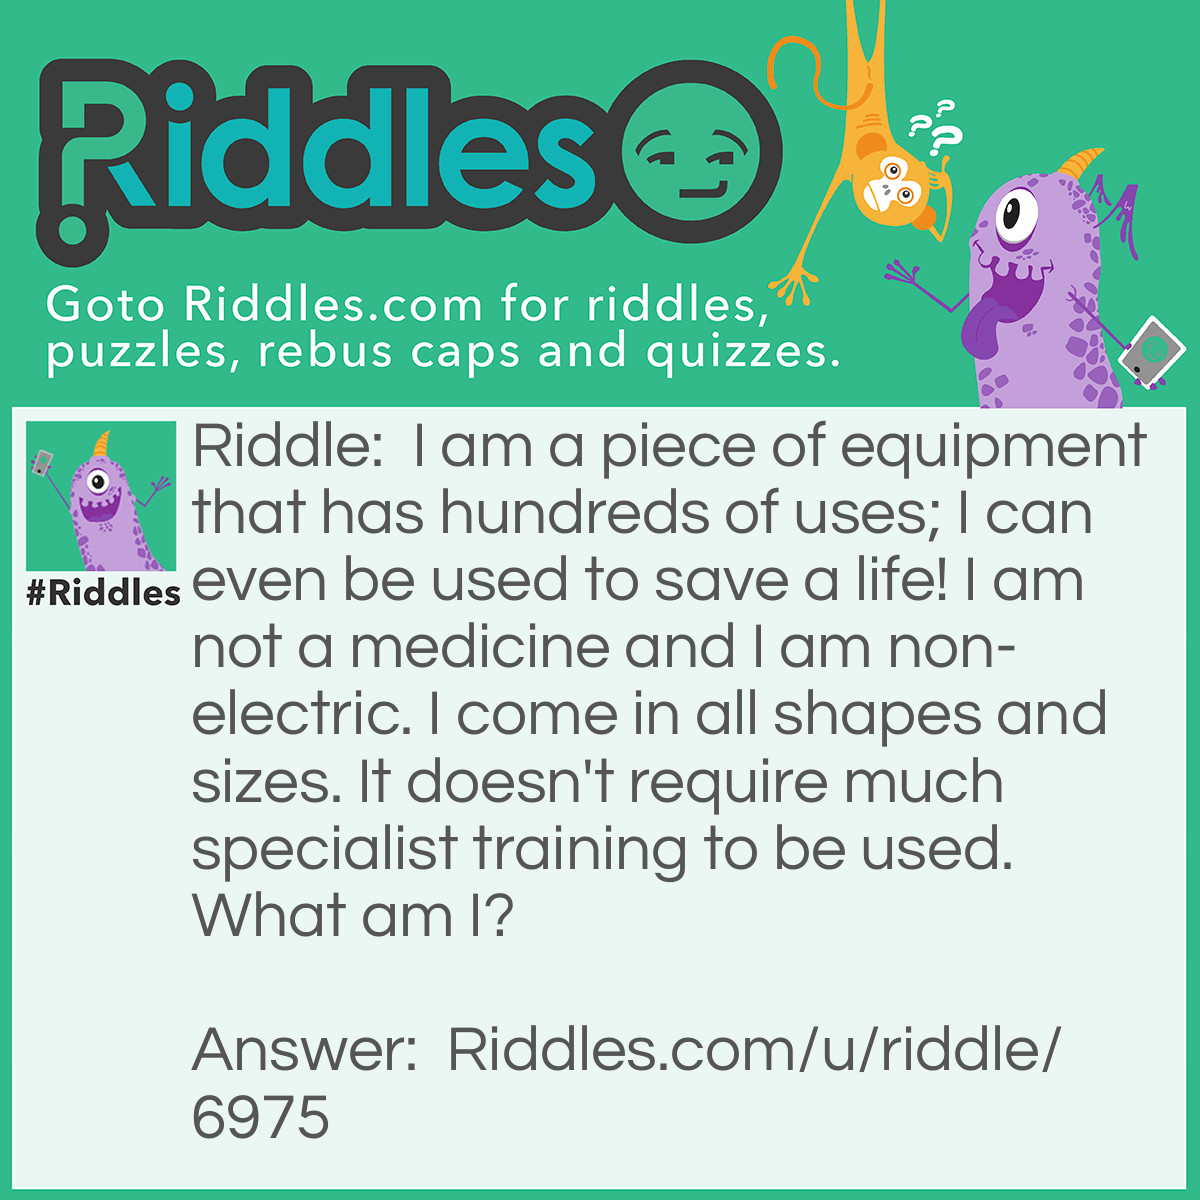 Riddle: I am a piece of equipment that has hundreds of uses; I can even be used to save a life! I am not a medicine and I am non-electric. I come in all shapes and sizes. It doesn't require much specialist training to be used. What am I? Answer: A rope.